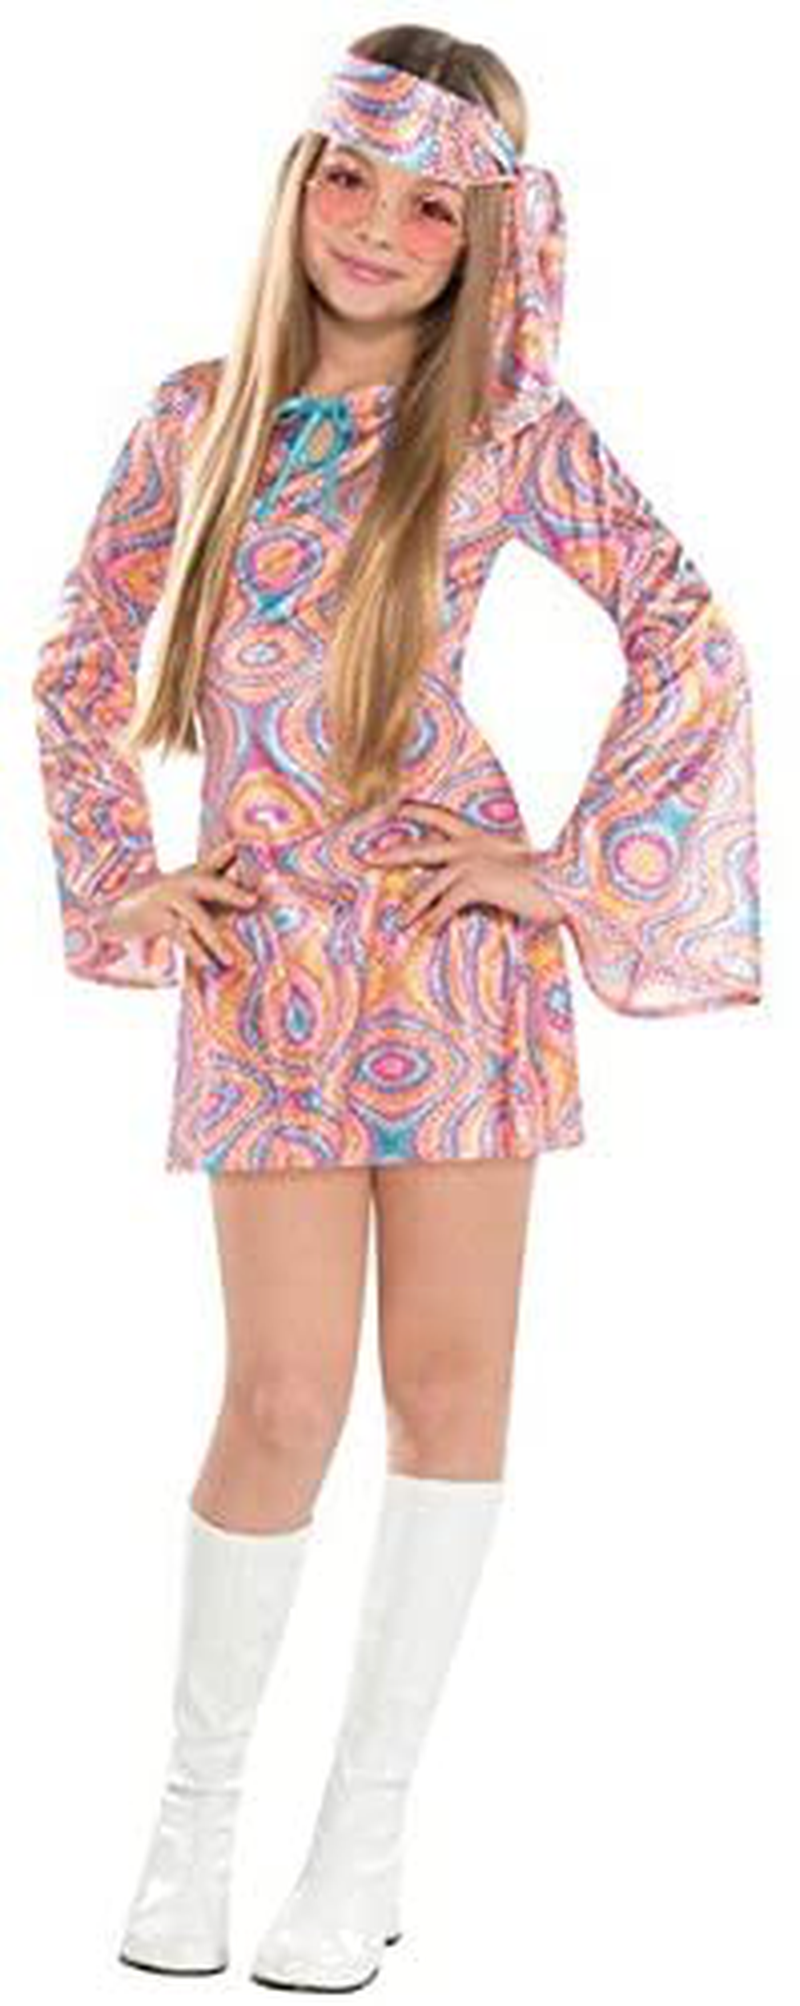 Suit Yourself Disco Diva Halloween Costume for Girls, Includes Headscarf